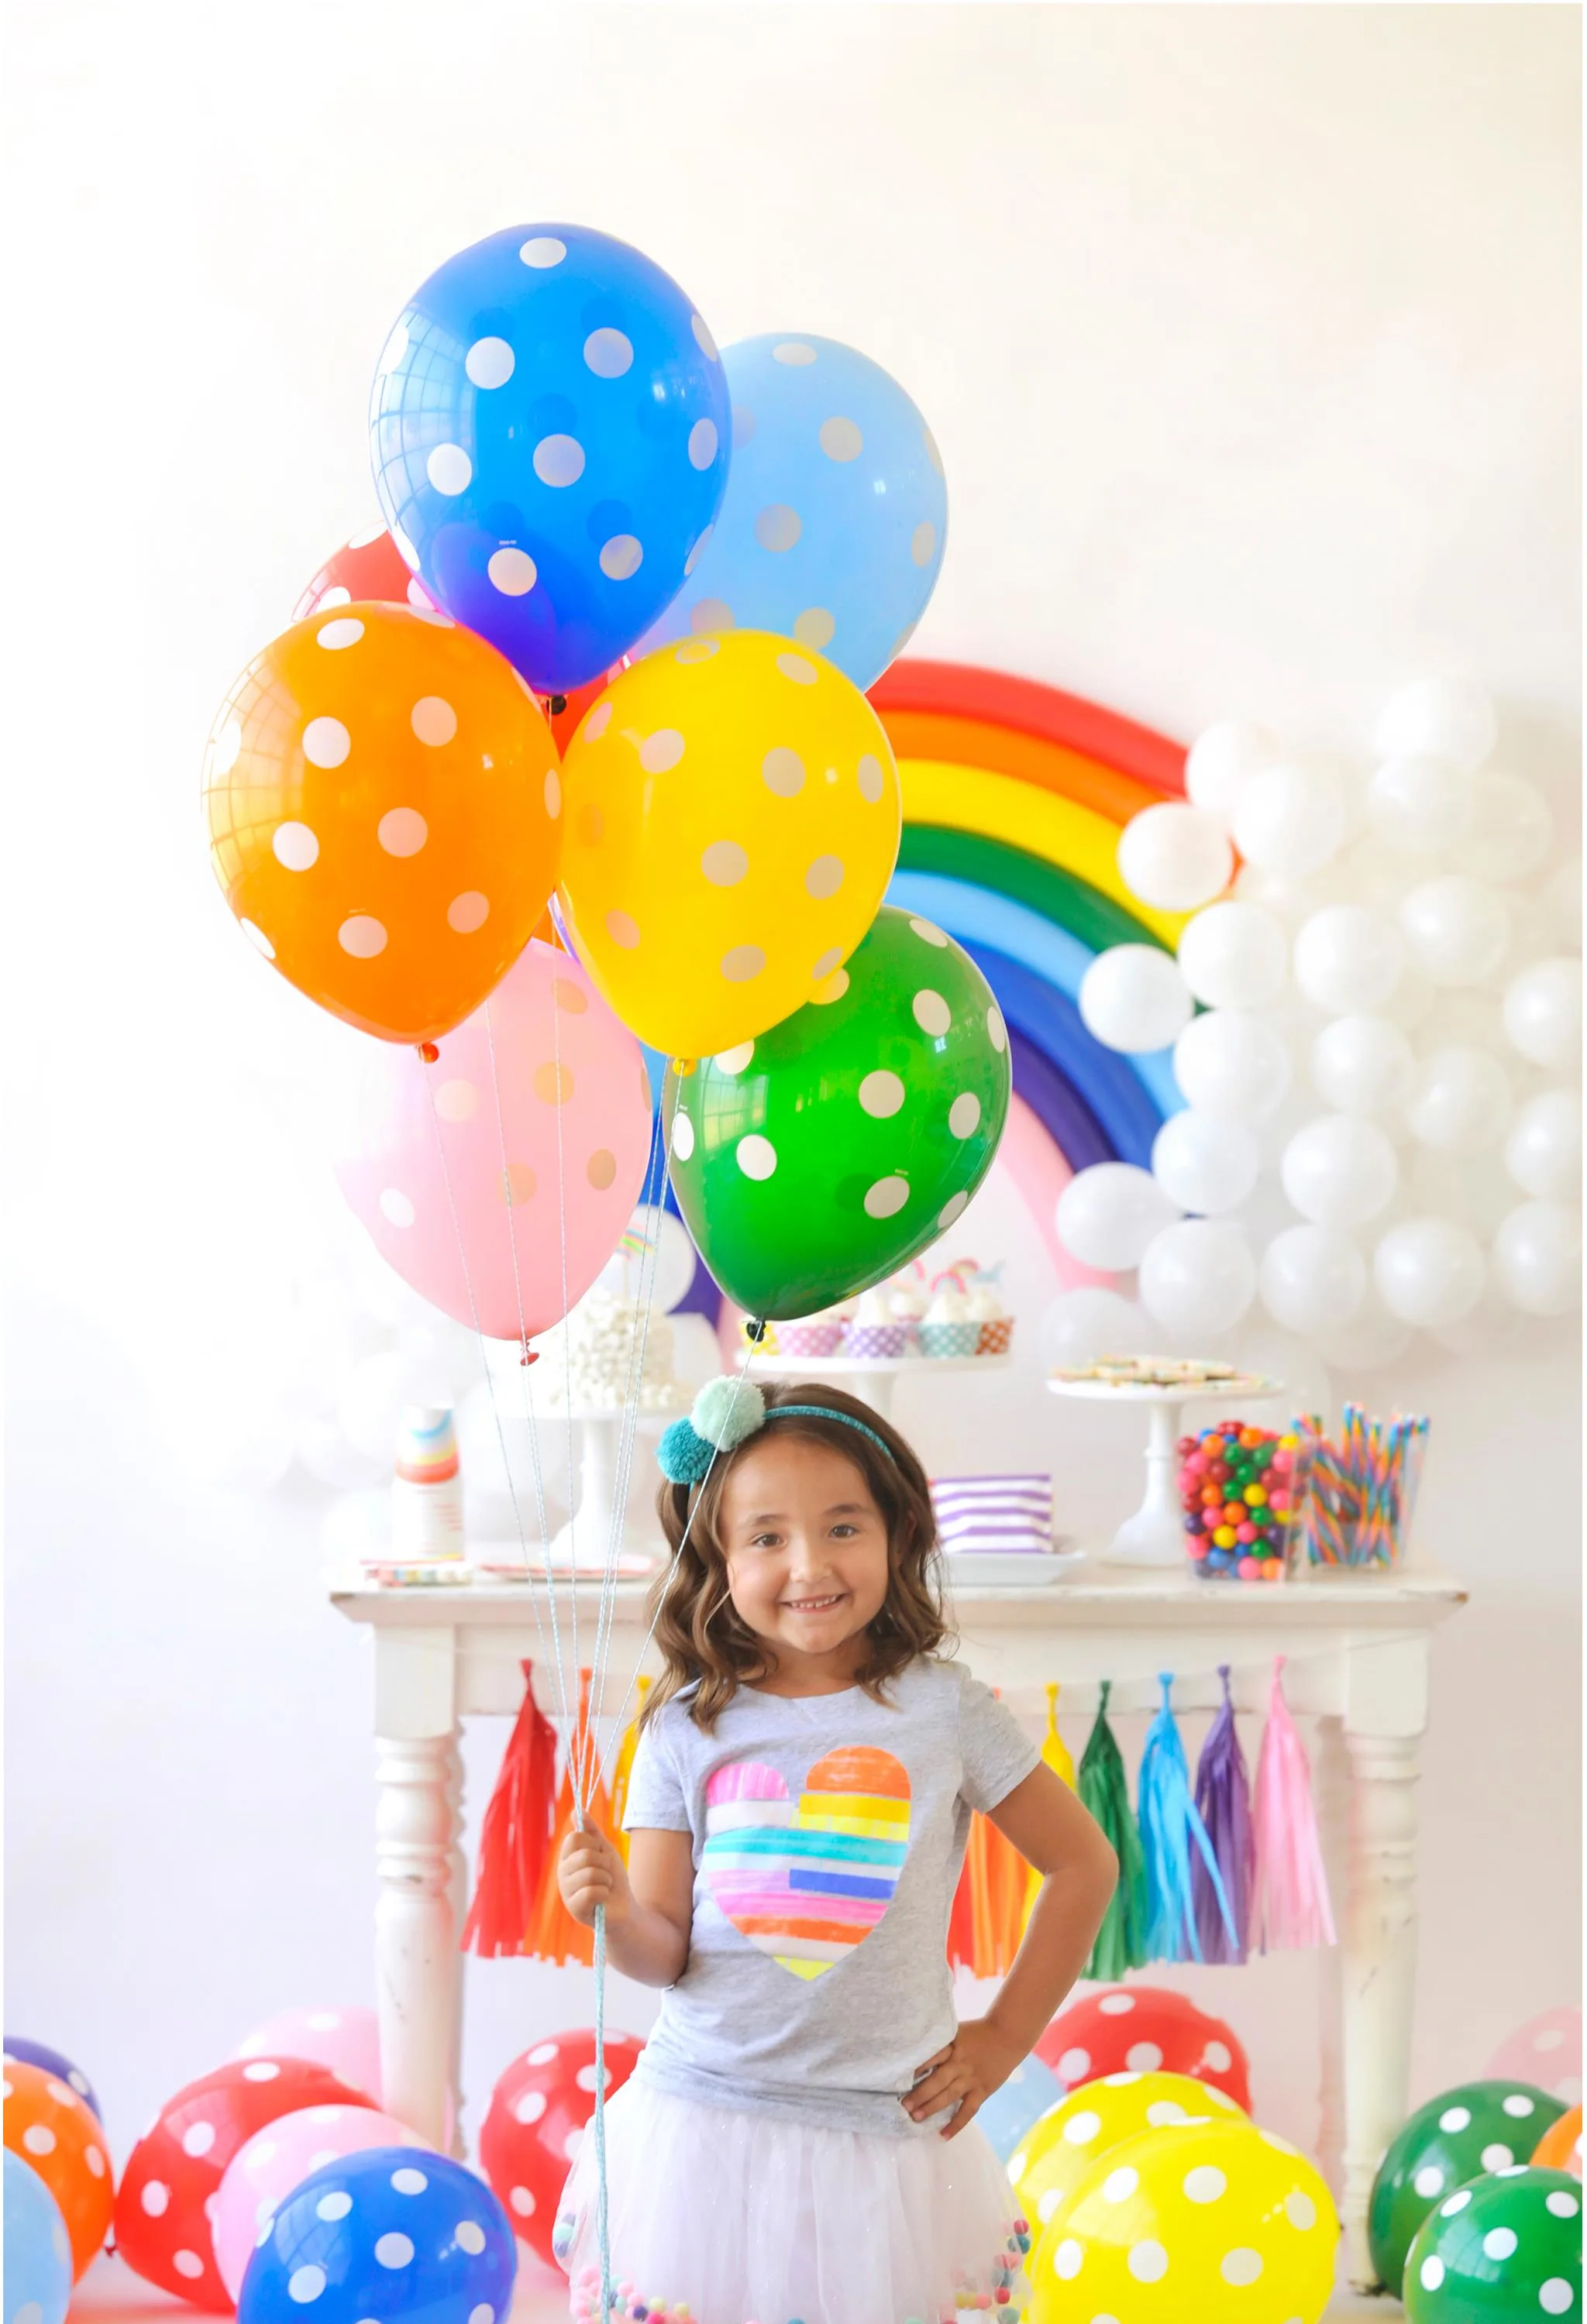 Over the Rainbow Party for Kids Colorful Kids Birthday Party